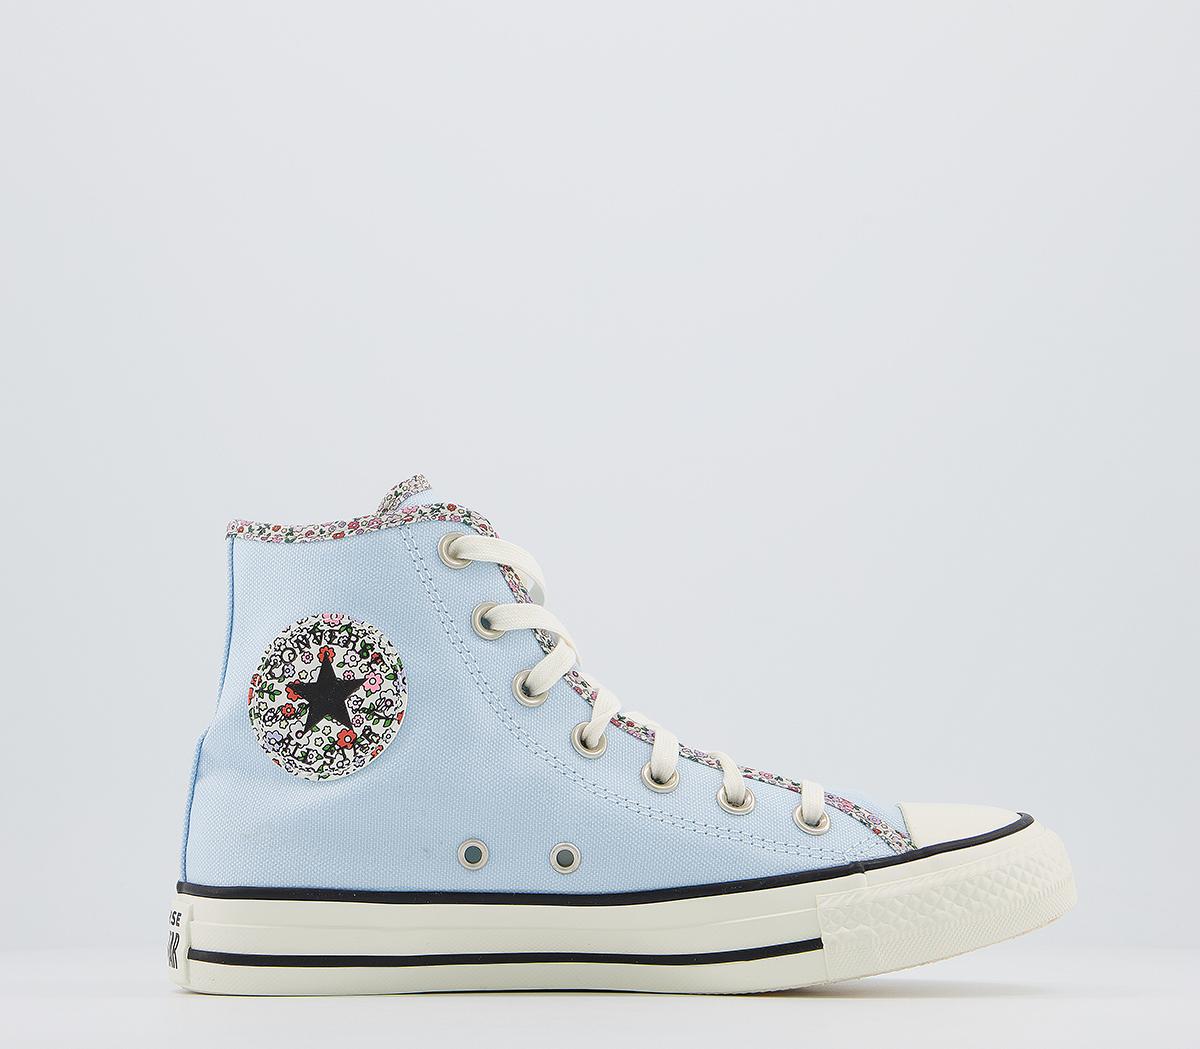 Converse Converse All Star Hi Trainers Agate Blue Egret Multi Floral  Exclusive - Women's Trainers